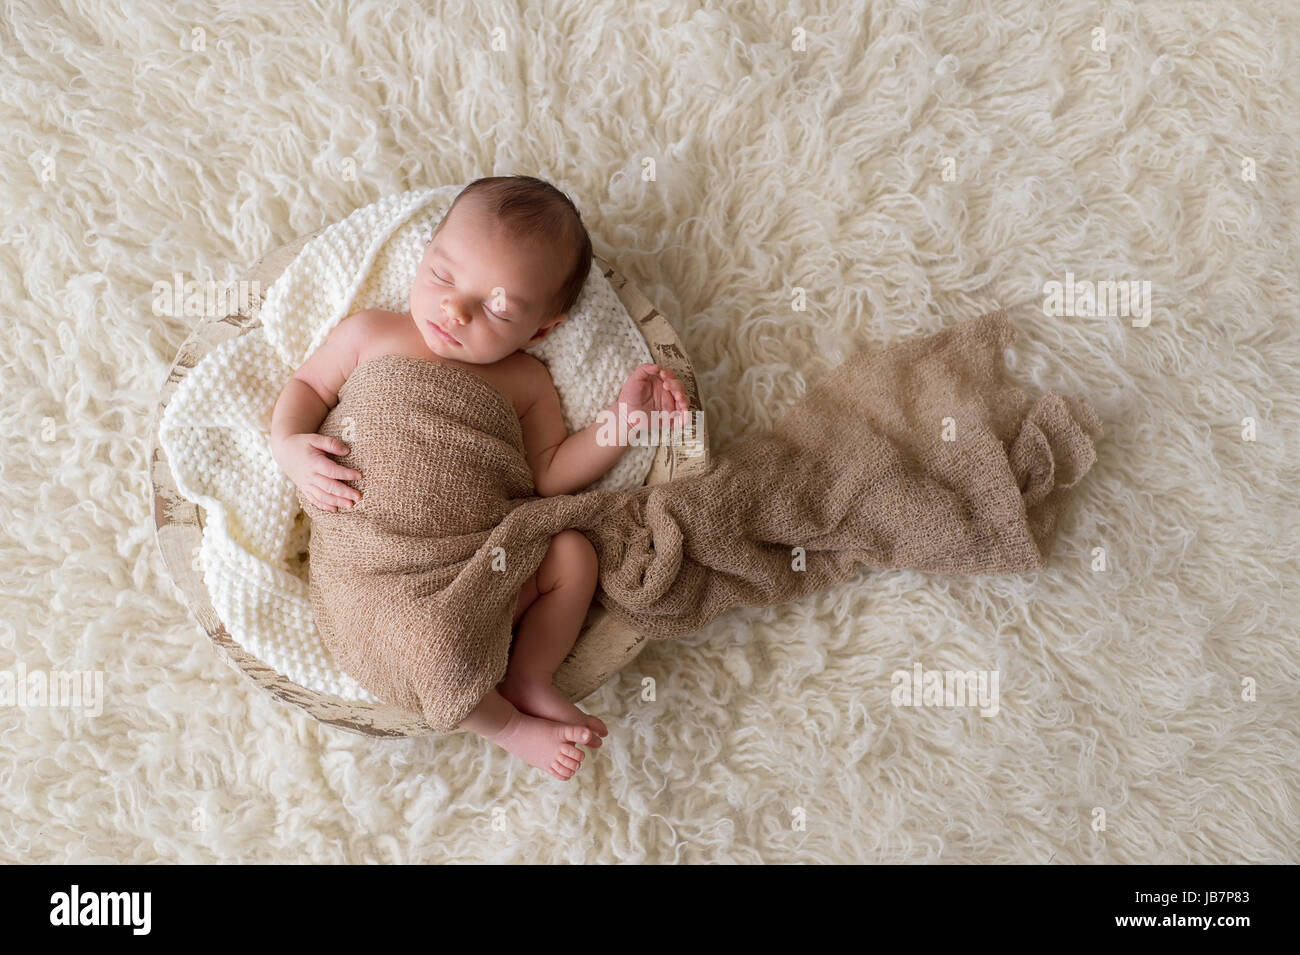 Two week old newborn baby boy swaddled in a beige wrap and sleeping in a round, wooden, trench bowl. Shot in the studio on a cream colored, flokati ru Stock Photo